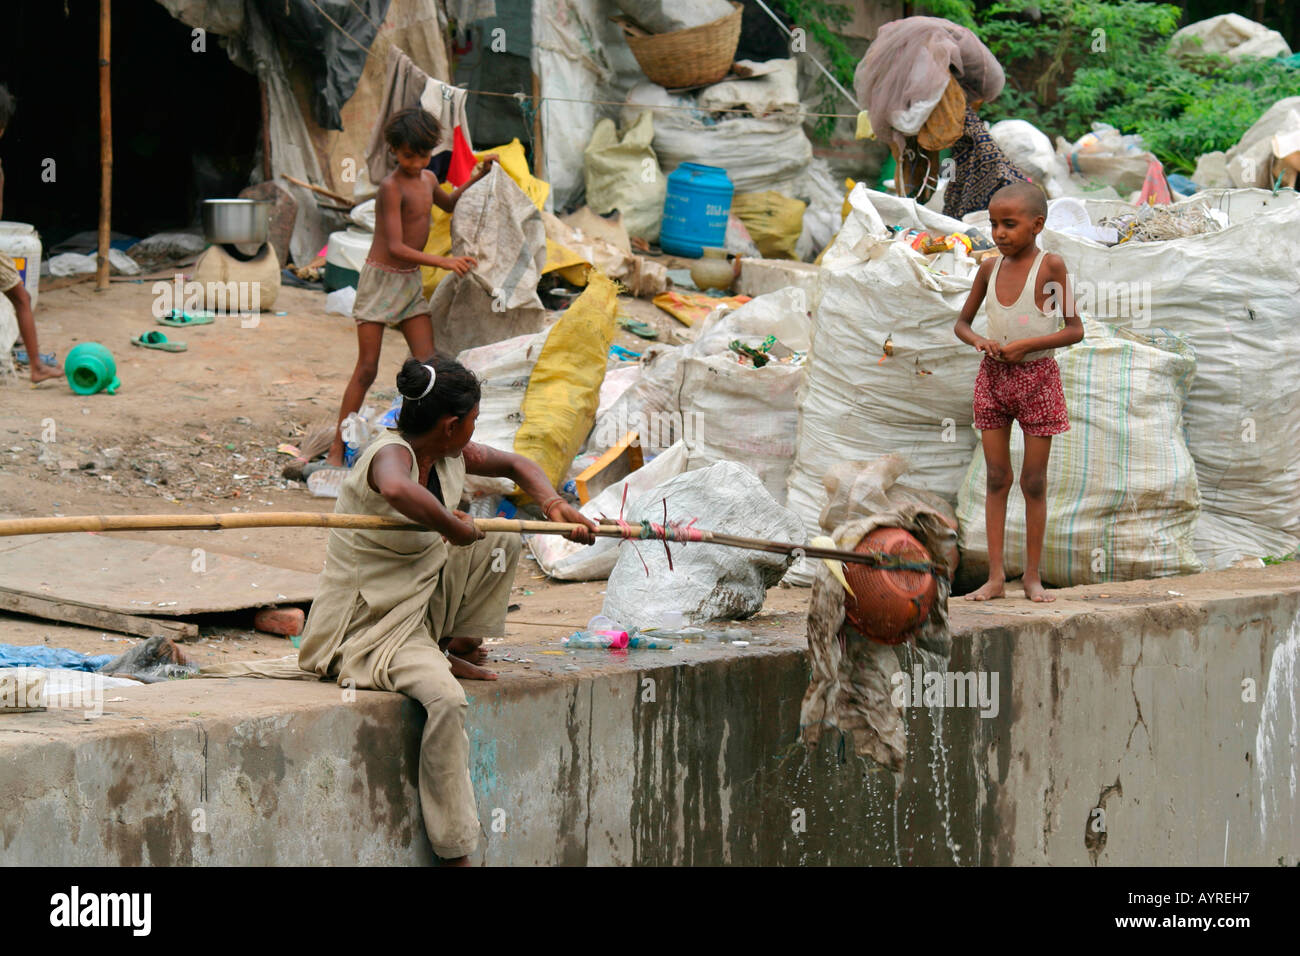 Poor condition of children living among garbage in a large camp, Agra, India Stock Photo